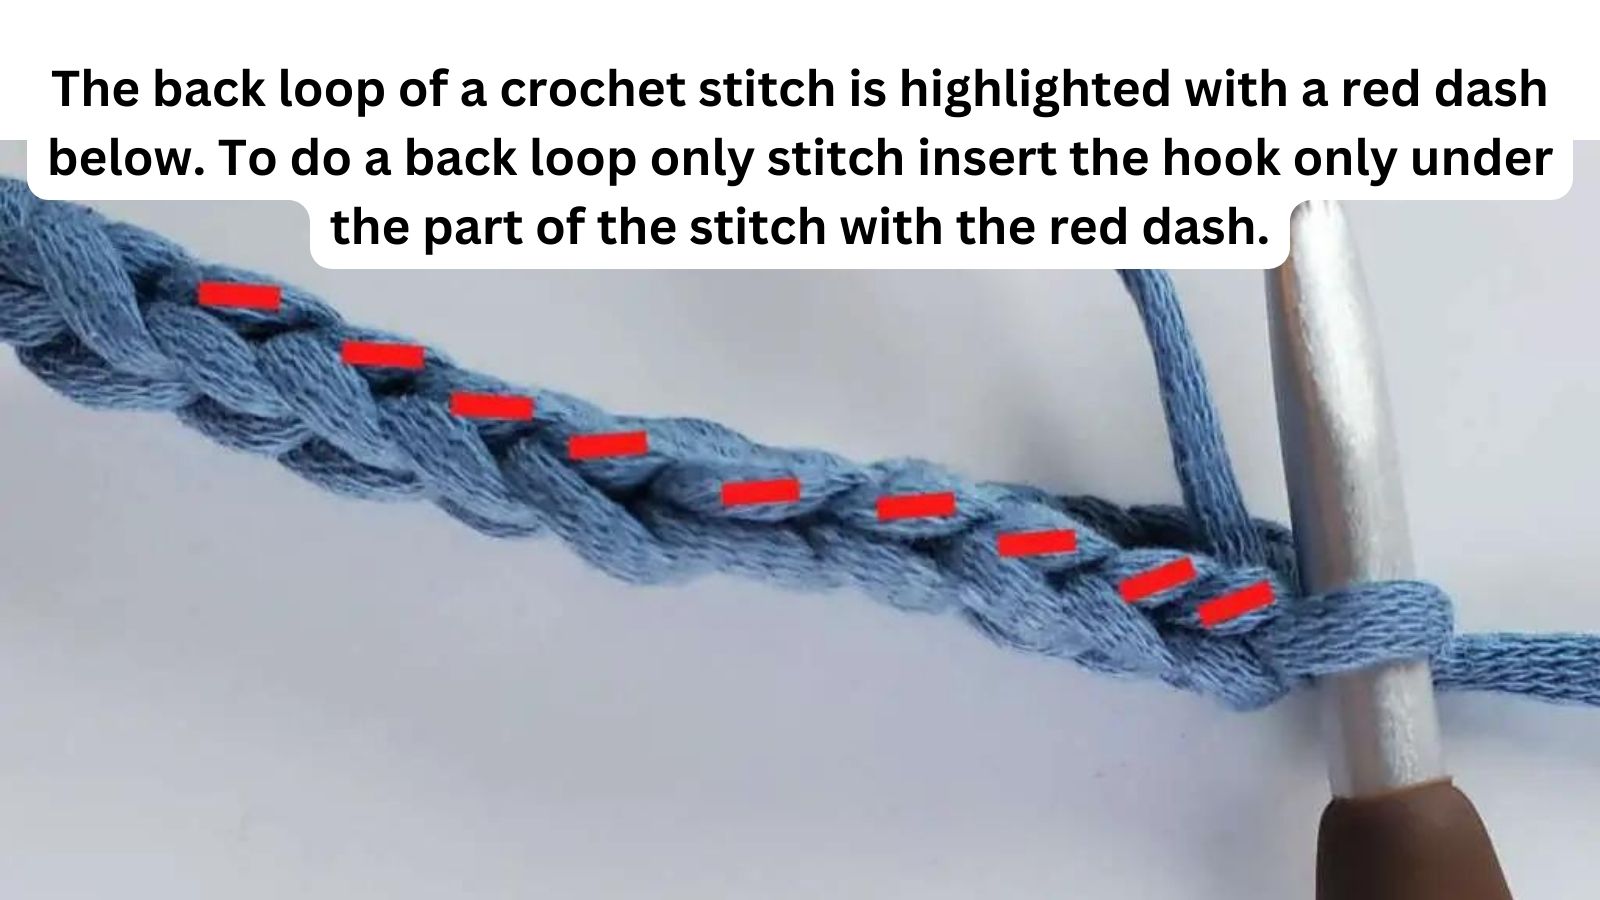 The back loop of a crochet stitch is highlighted with a red dash below. To do a back loop only stitch insert the hook only under the part of the stitch with the red dash.